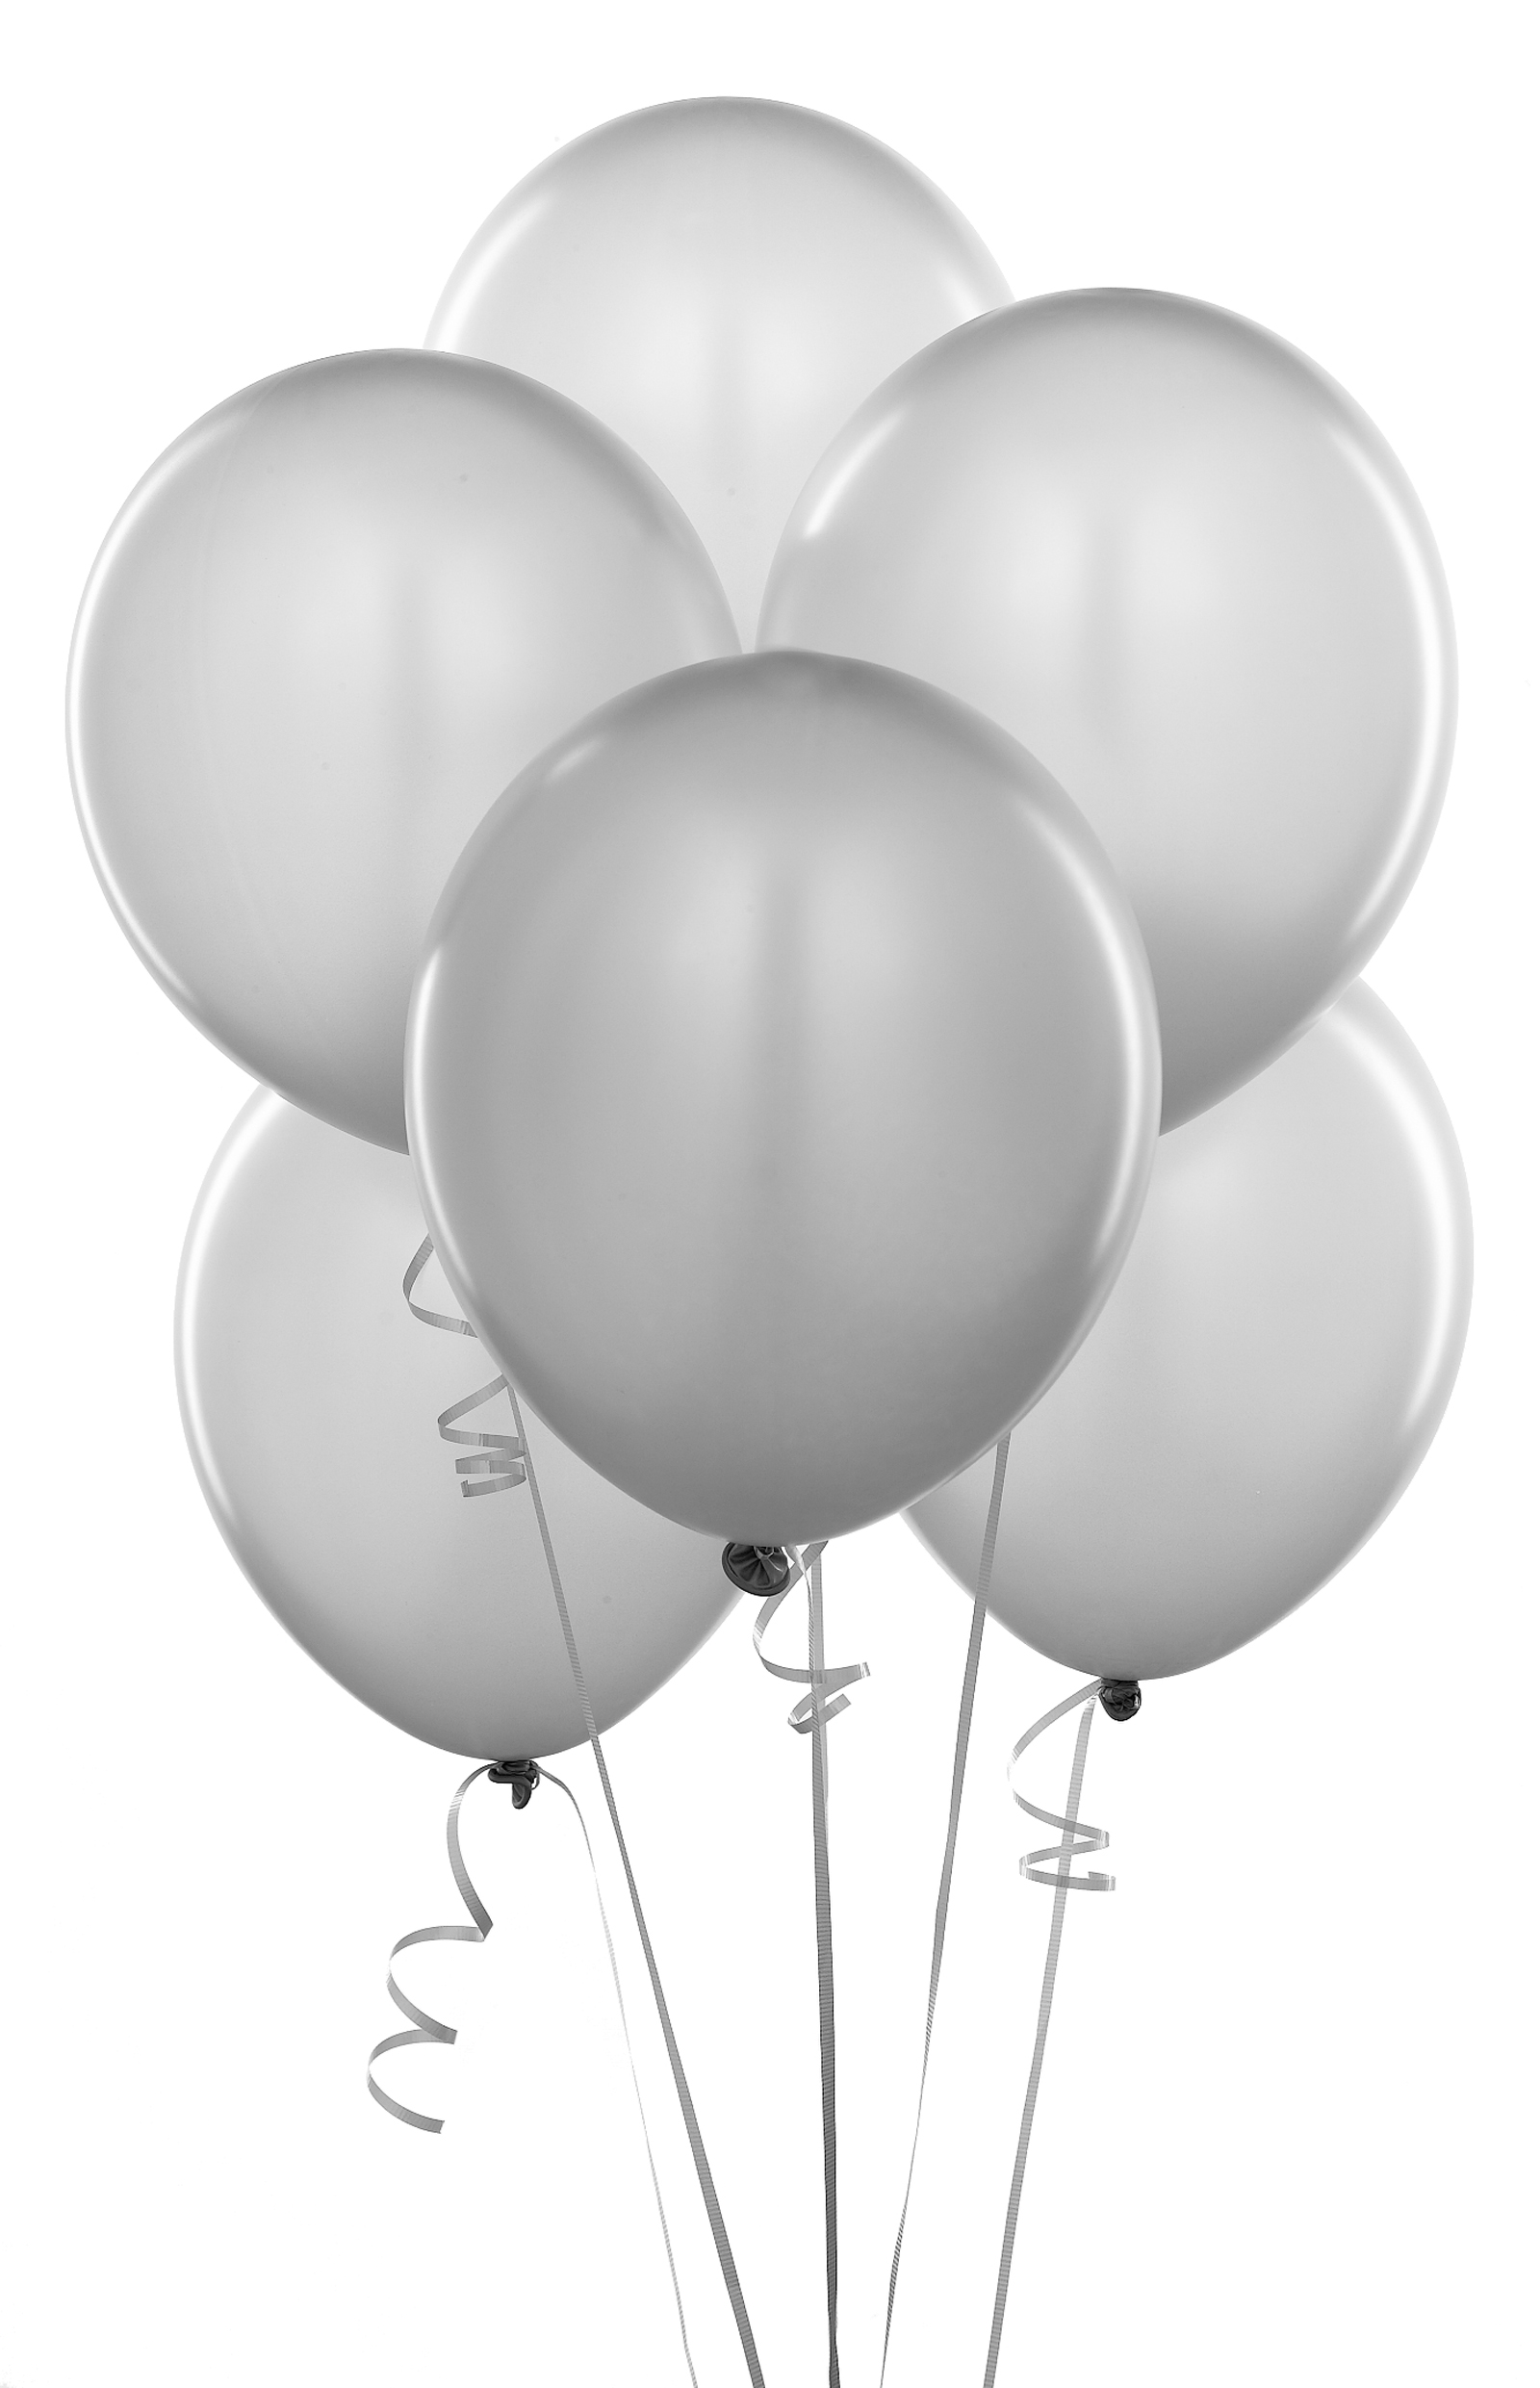 Balloons Clipart Black And White : Free Black Balloons Cliparts ...